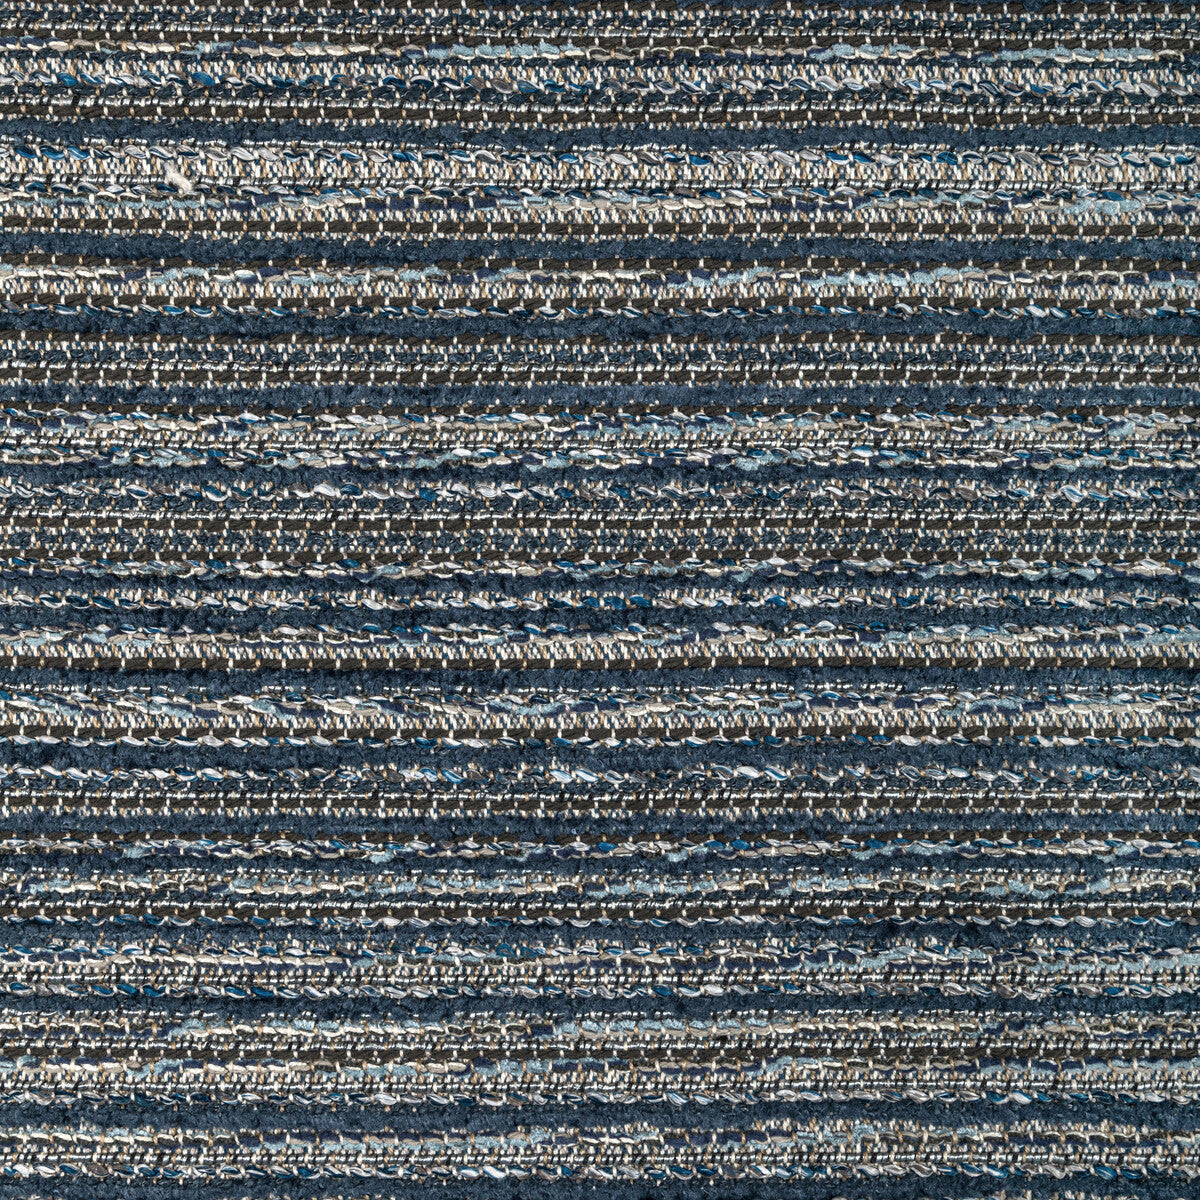 Kravet Design fabric in 36416-50 color - pattern 36416.50.0 - by Kravet Design in the Performance Crypton Home collection